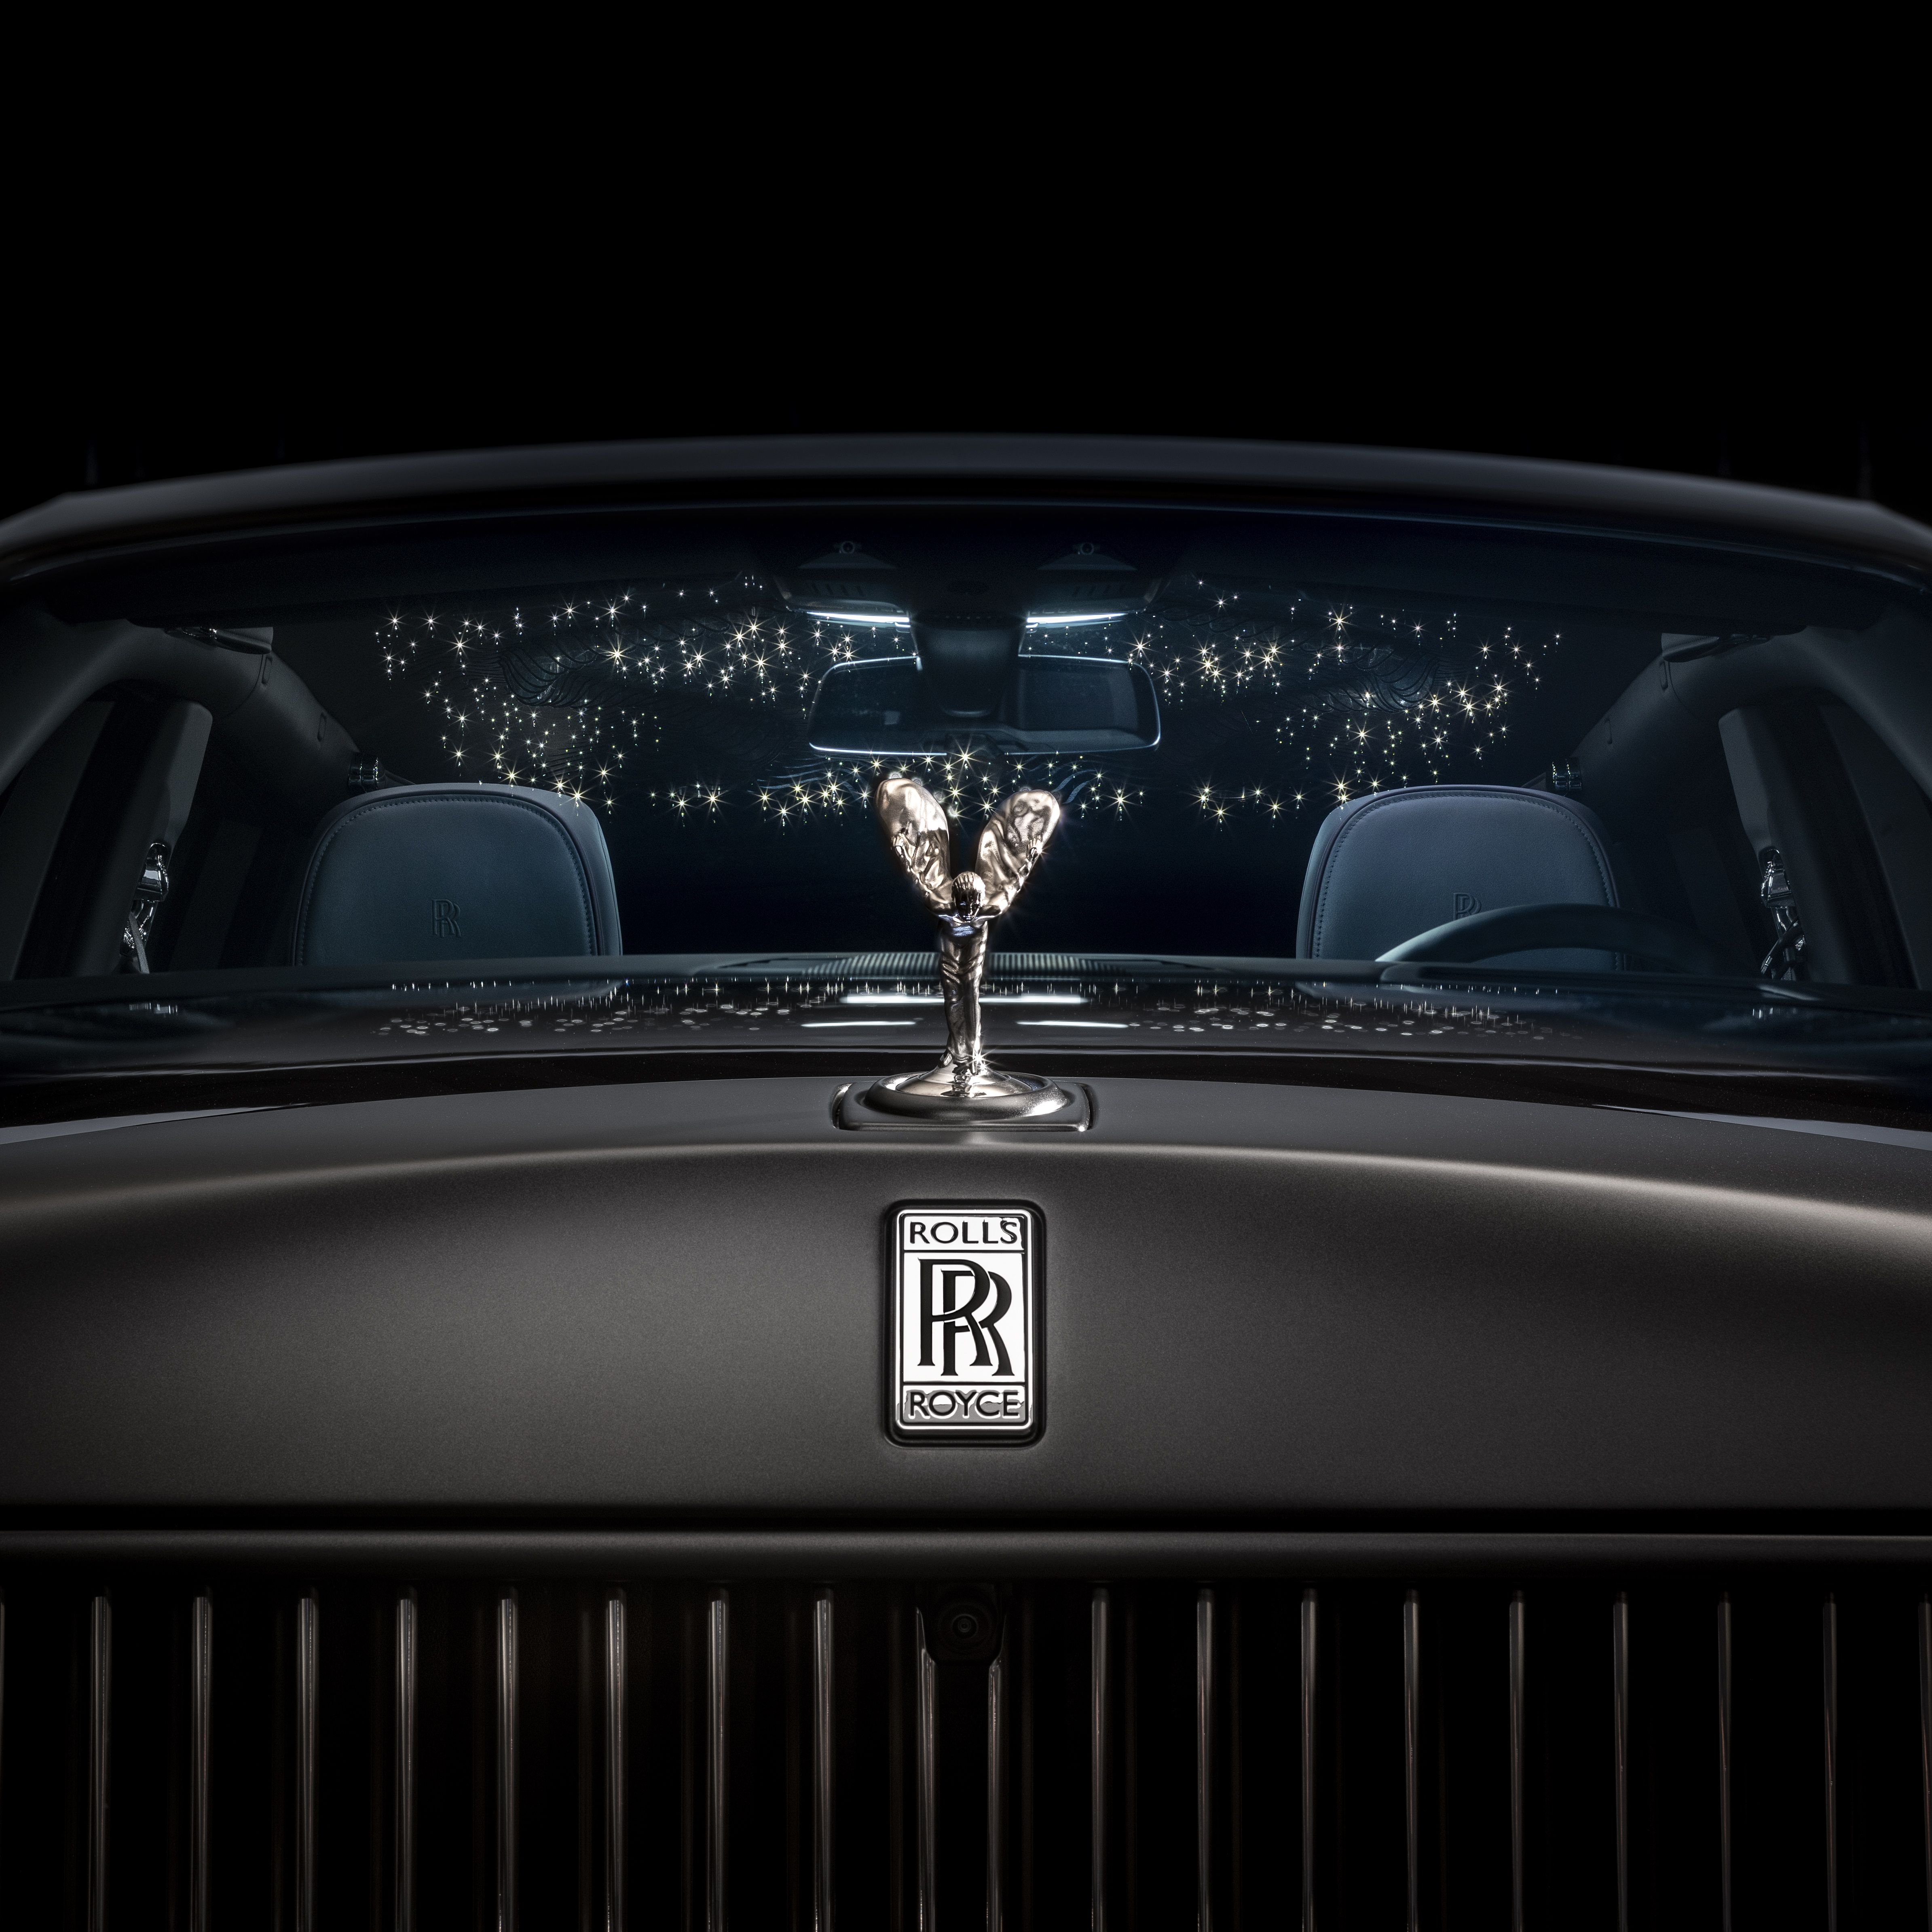 RollsRoyce Cars and SUVs Reviews Pricing and Specs